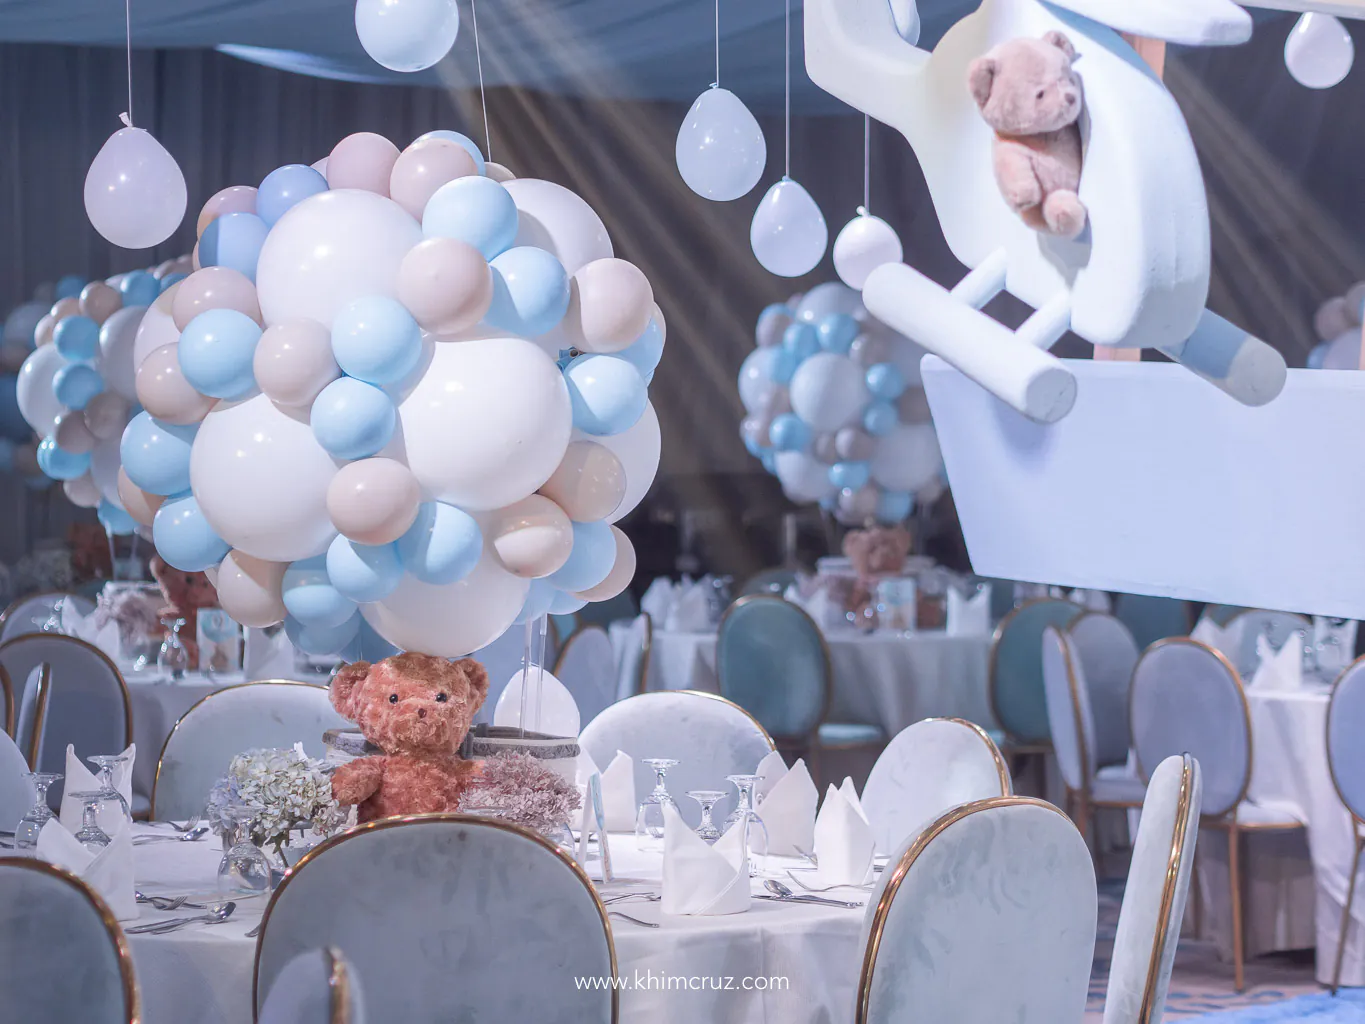 balloons as hot air balloon table centerpiece with bear on guest tables